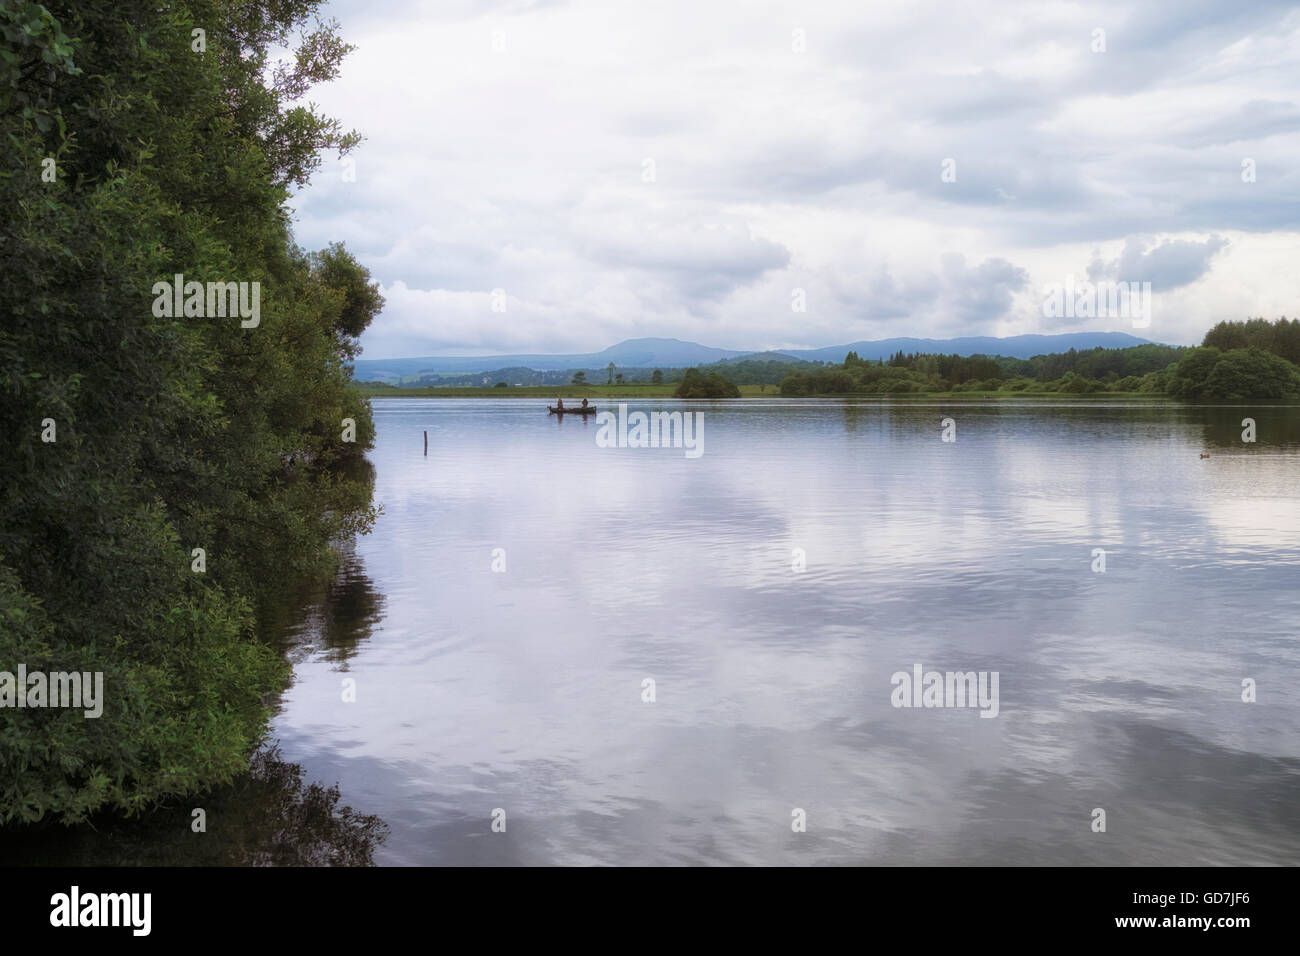 Peaceful scene of two men in a boat fishing in the calm waters of Lake of Menteith - Scotland's only loch. Stock Photo